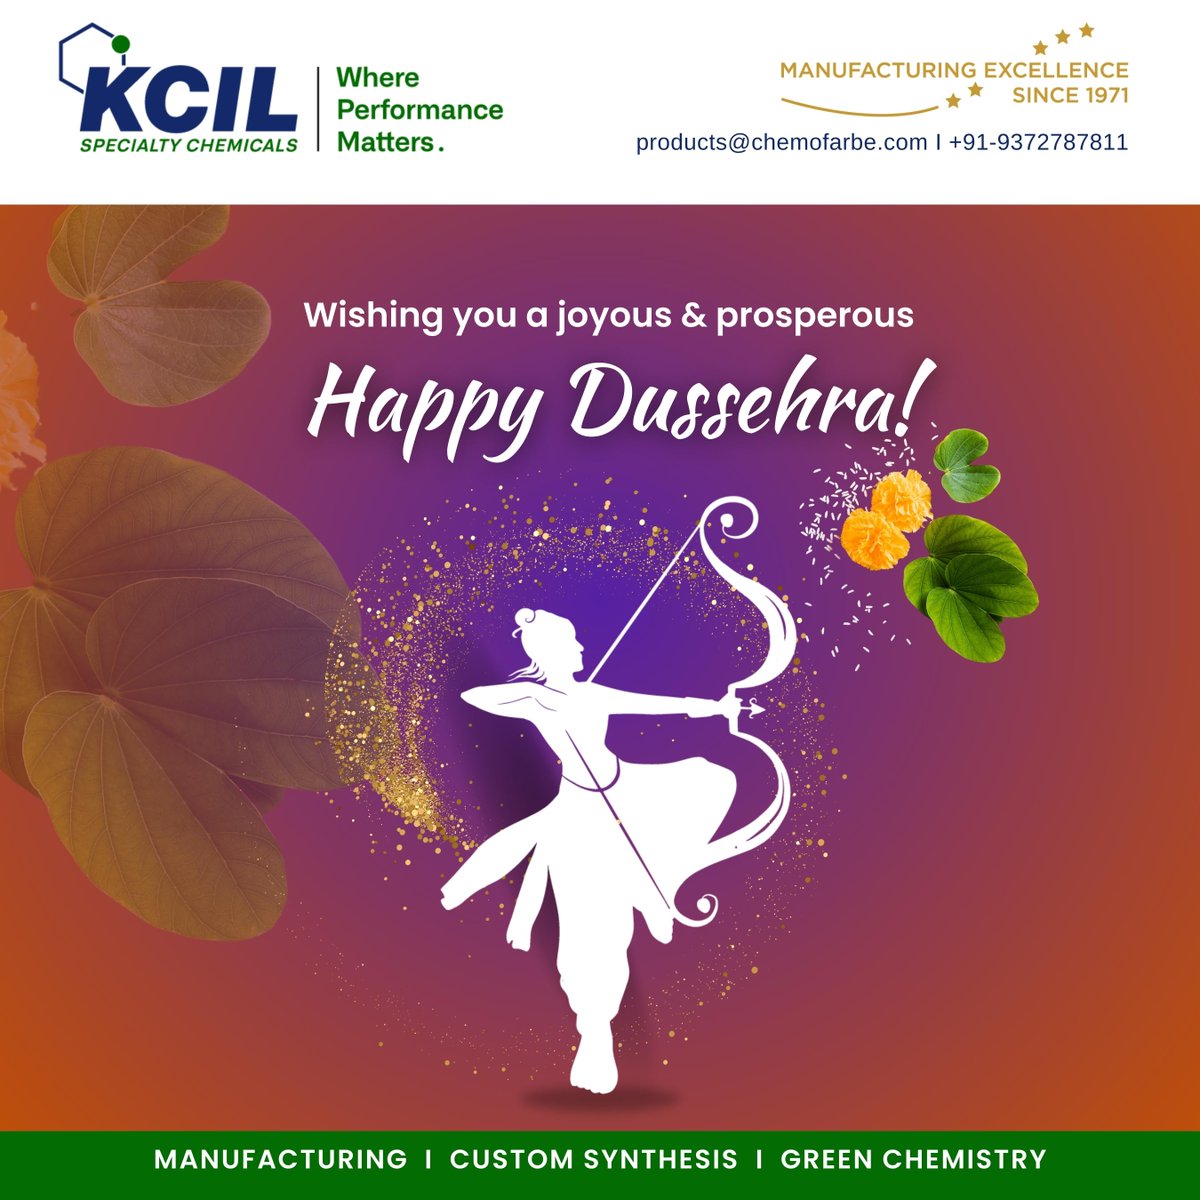 Wishing you a joyous and prosperous Dussehra! May this festive season bring you victory over all obstacles and the triumph of good over evil. 🏹🌟 #HappyDussehra #KairavChemofarbe  #SpecialityChemicals  #KCIL